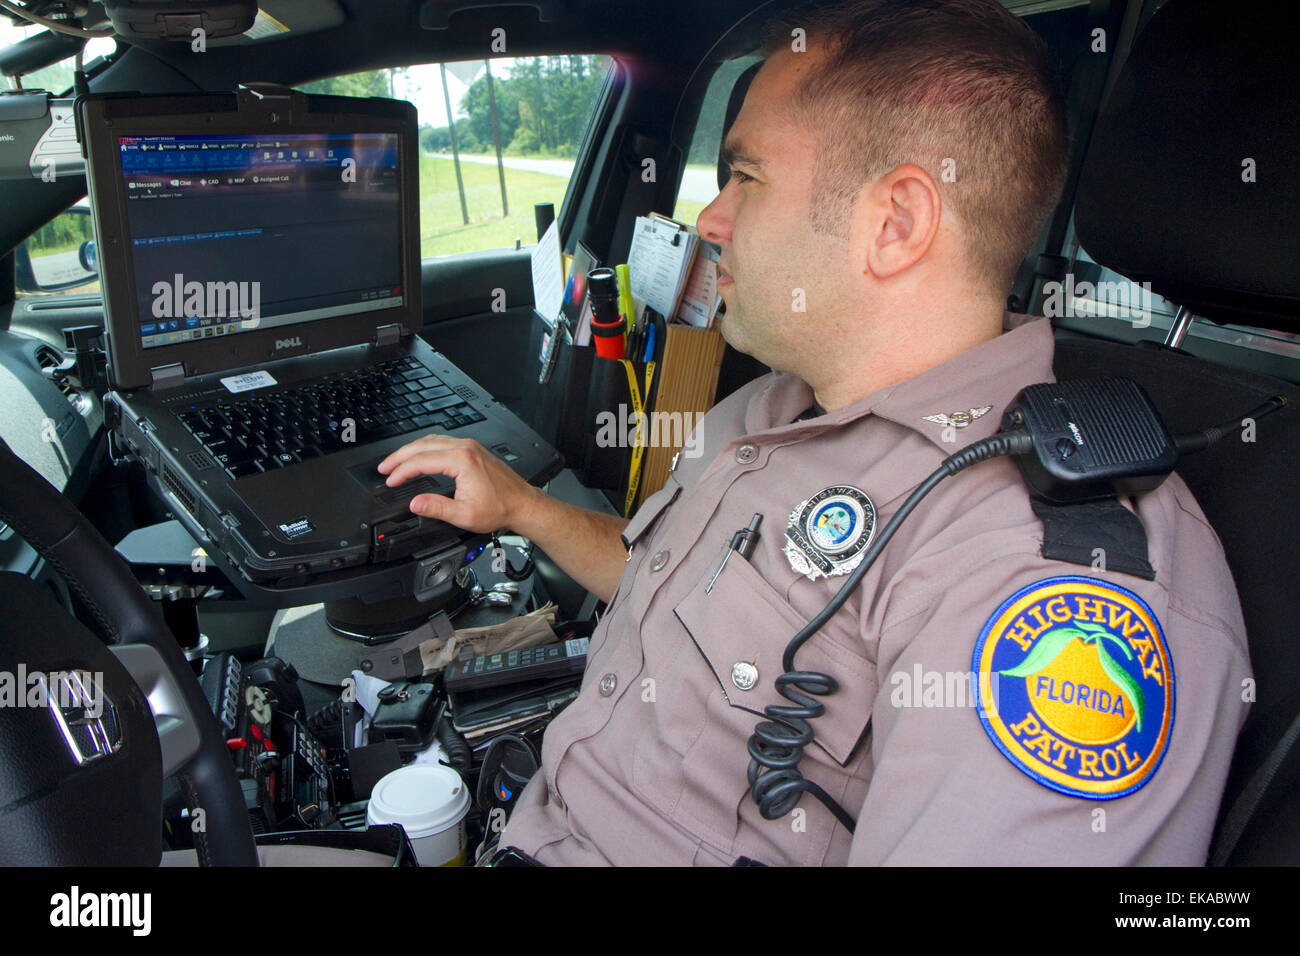 Florida state trooper using computer in patrol car. Stock Photo